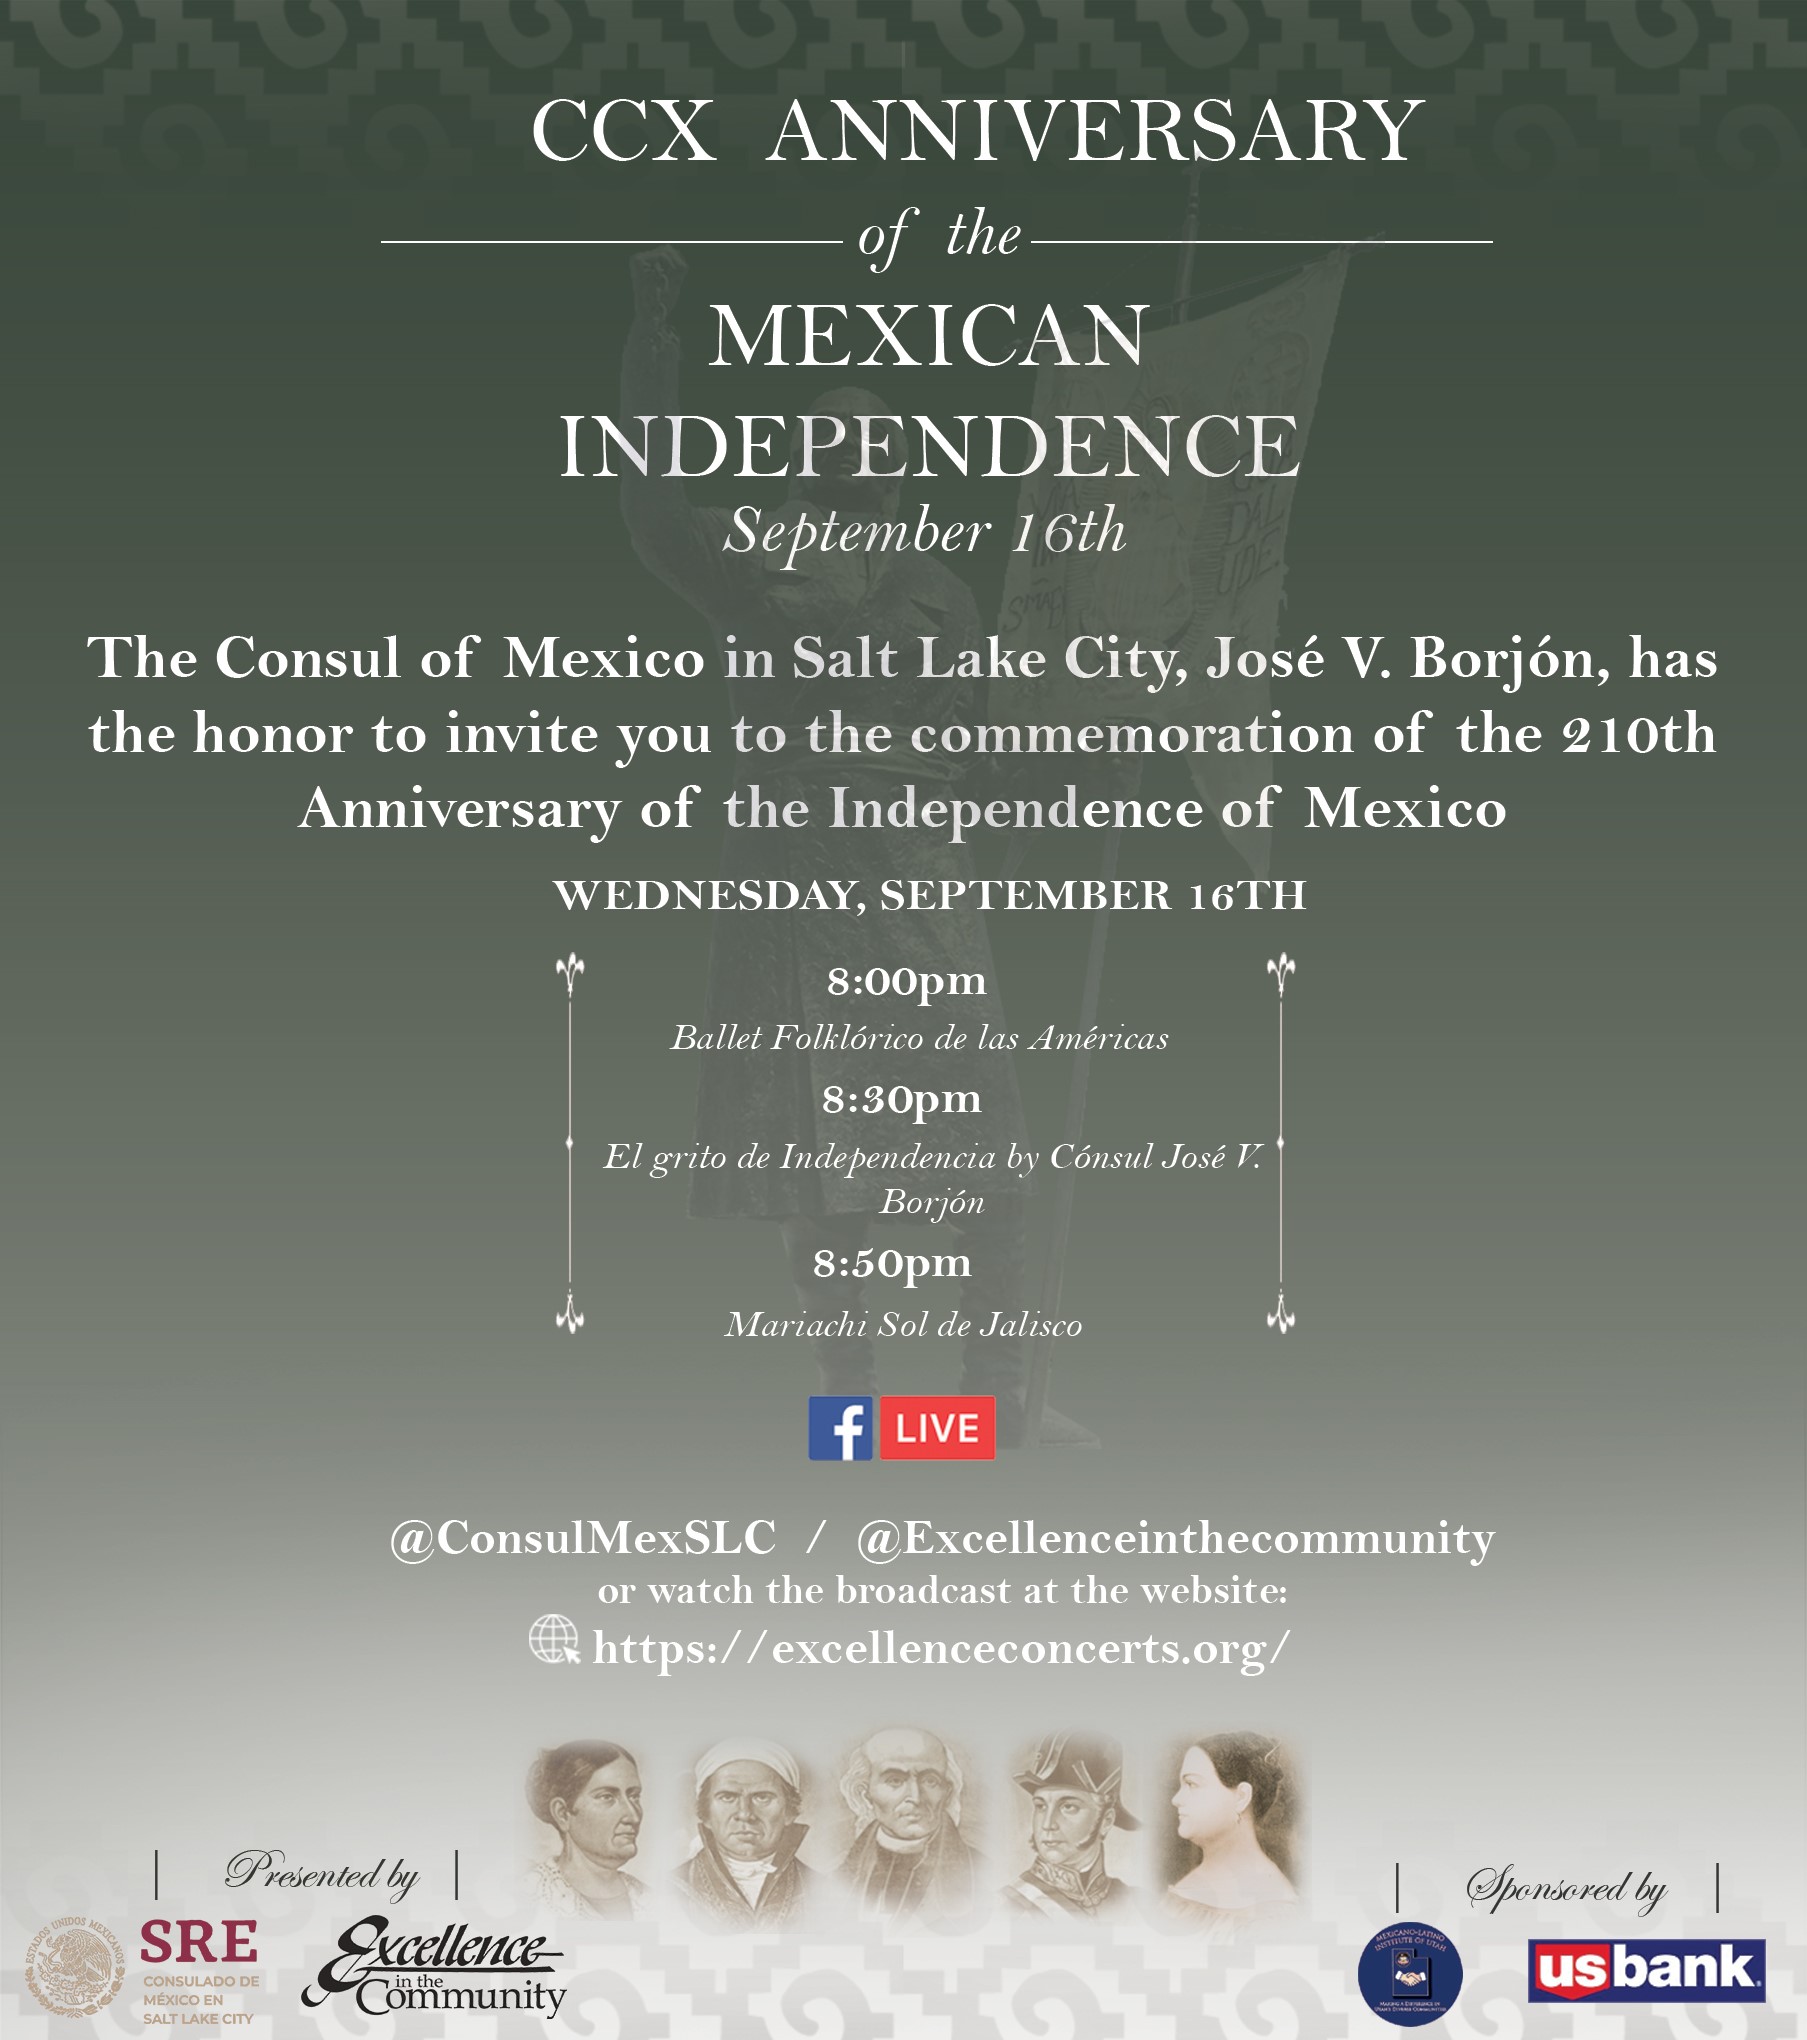 CCX Anniversary of the Mexican Independence